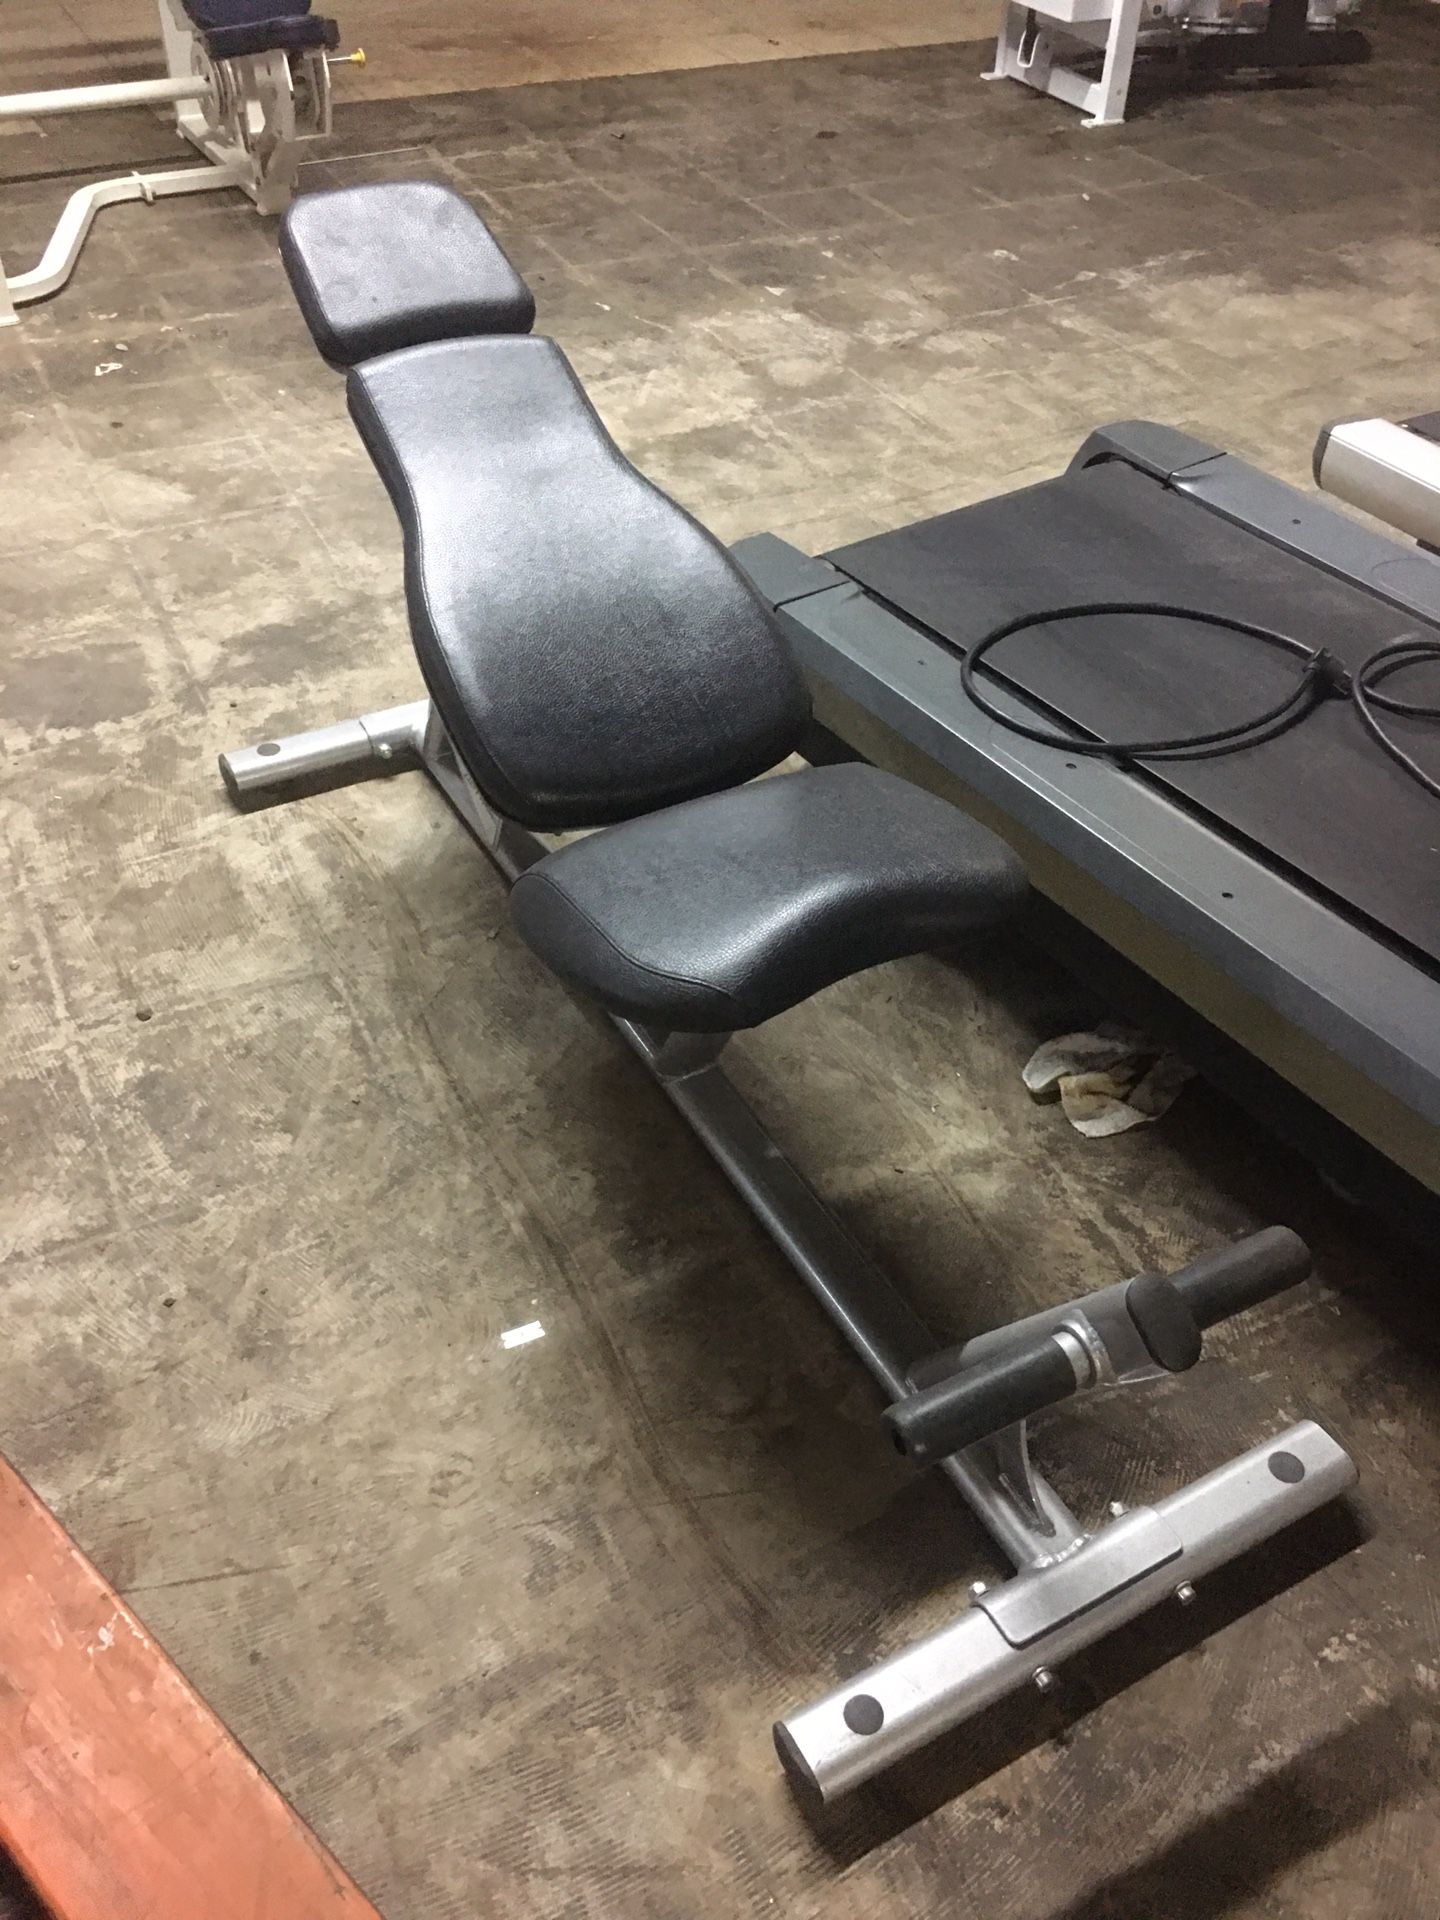 Commercial Abdominal Bench